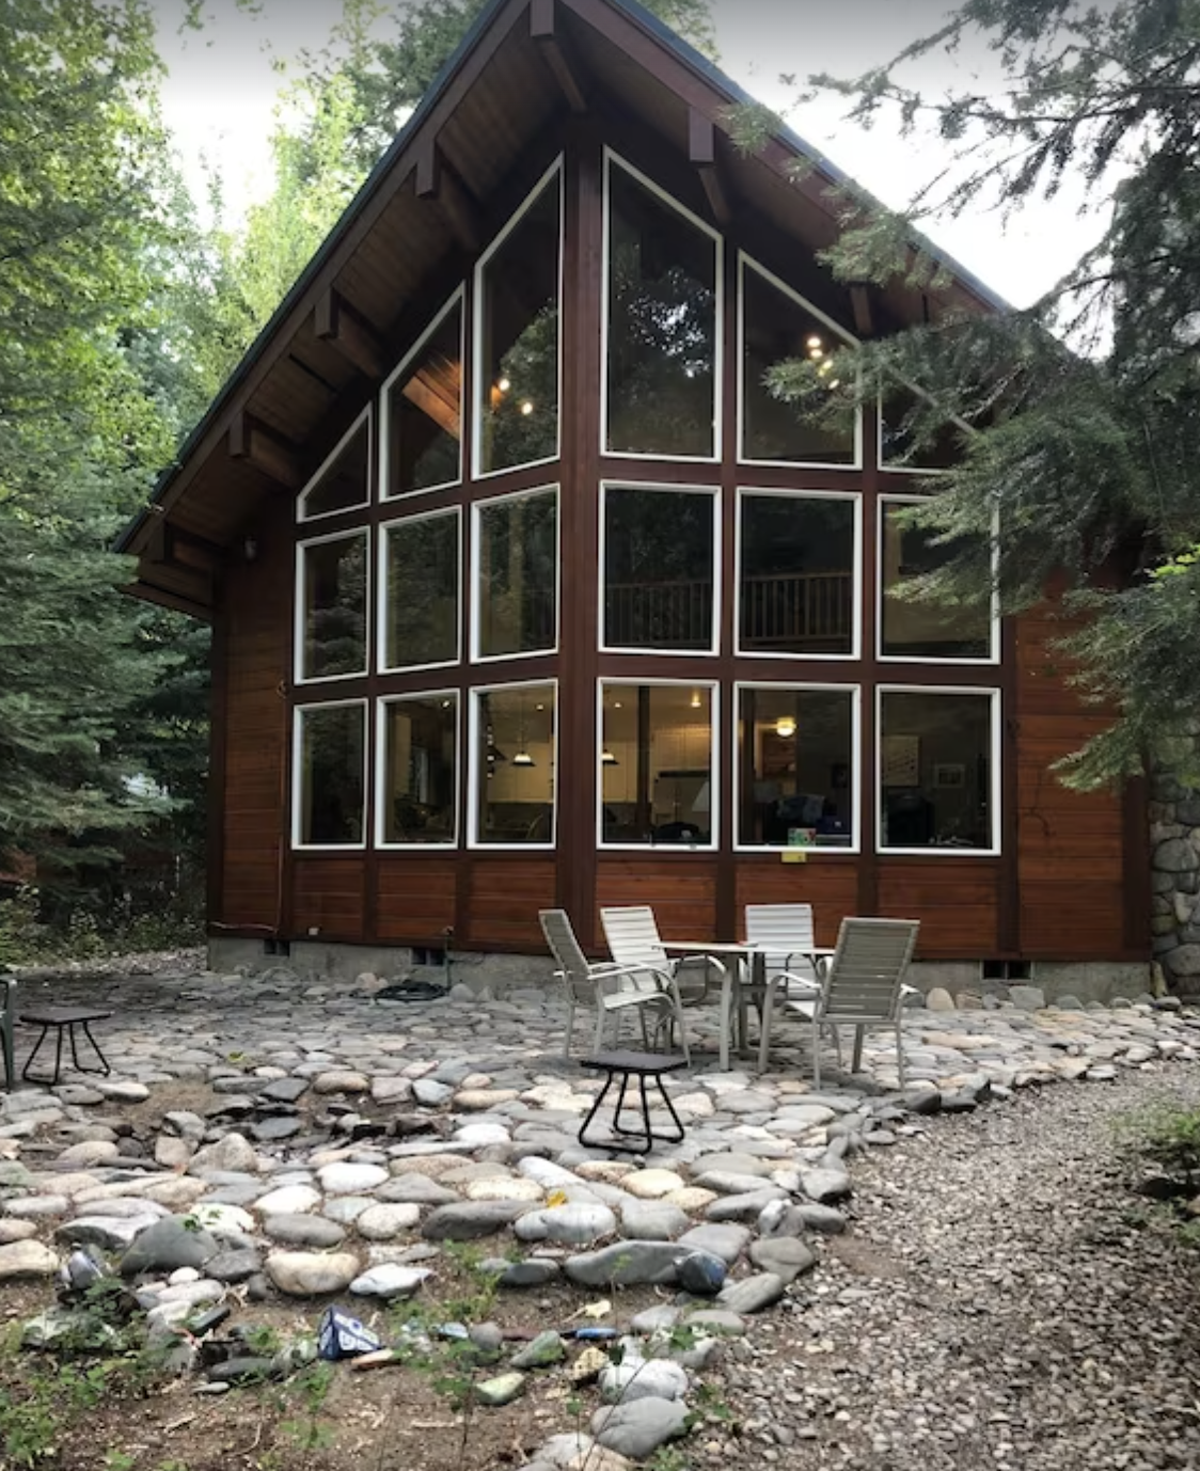 Winthrop WA cabin with a lot of windows